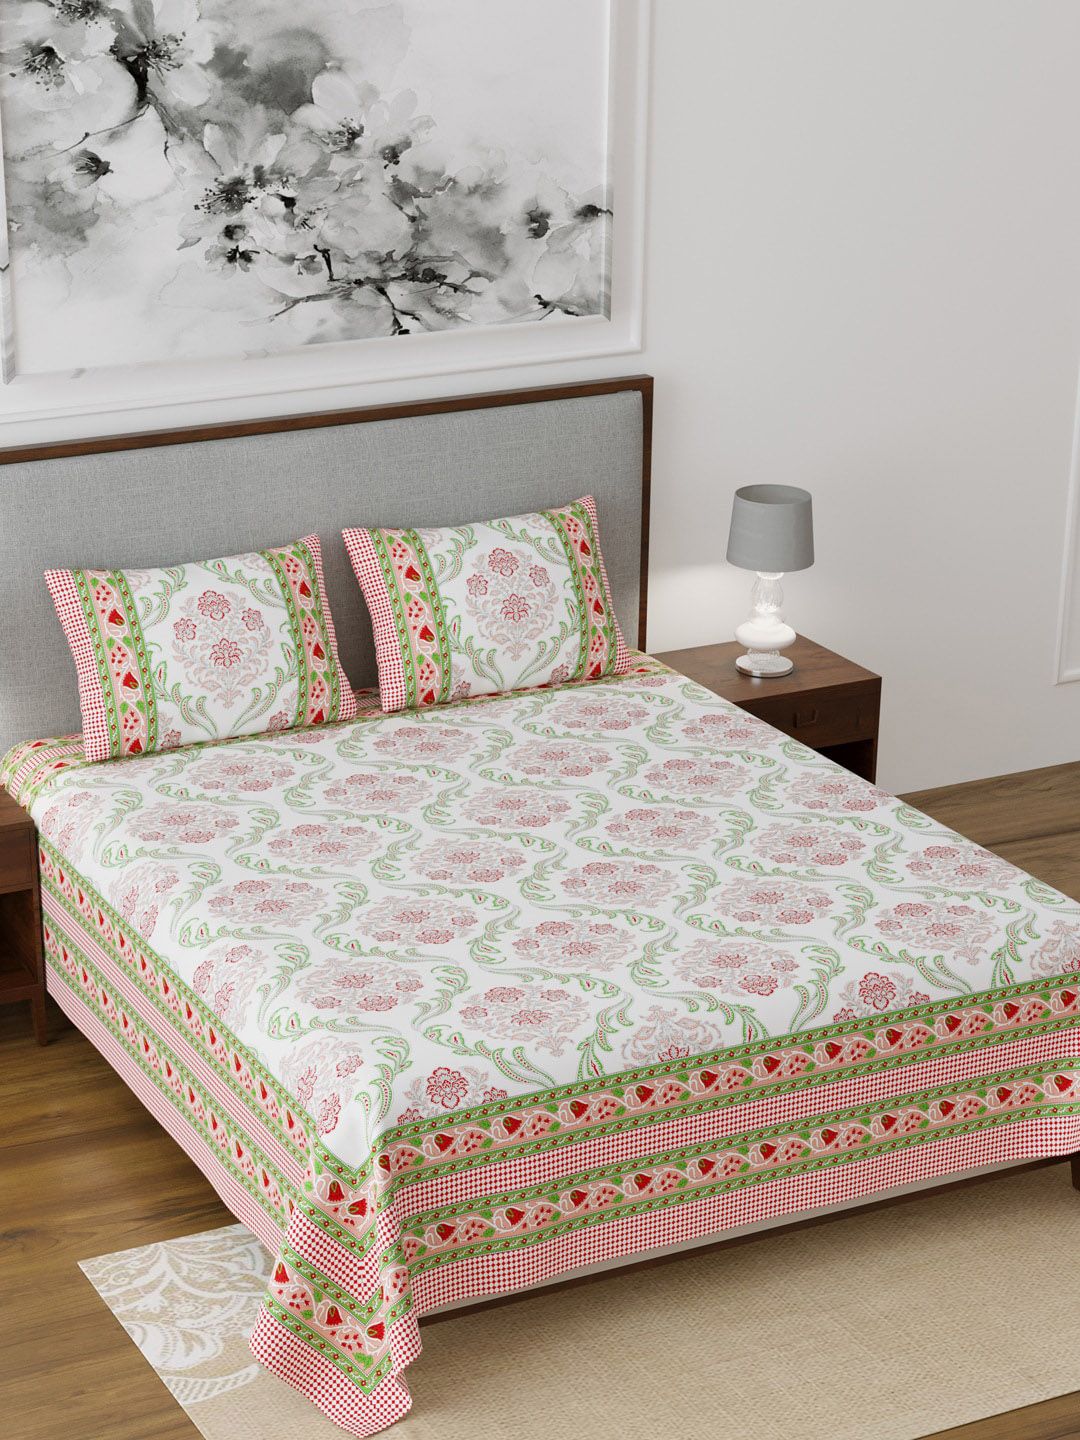 Salona Bichona White & Green Ethnic Motifs 120 TC Cotton 1 King Bedsheet with 2 Pillow Covers Price in India